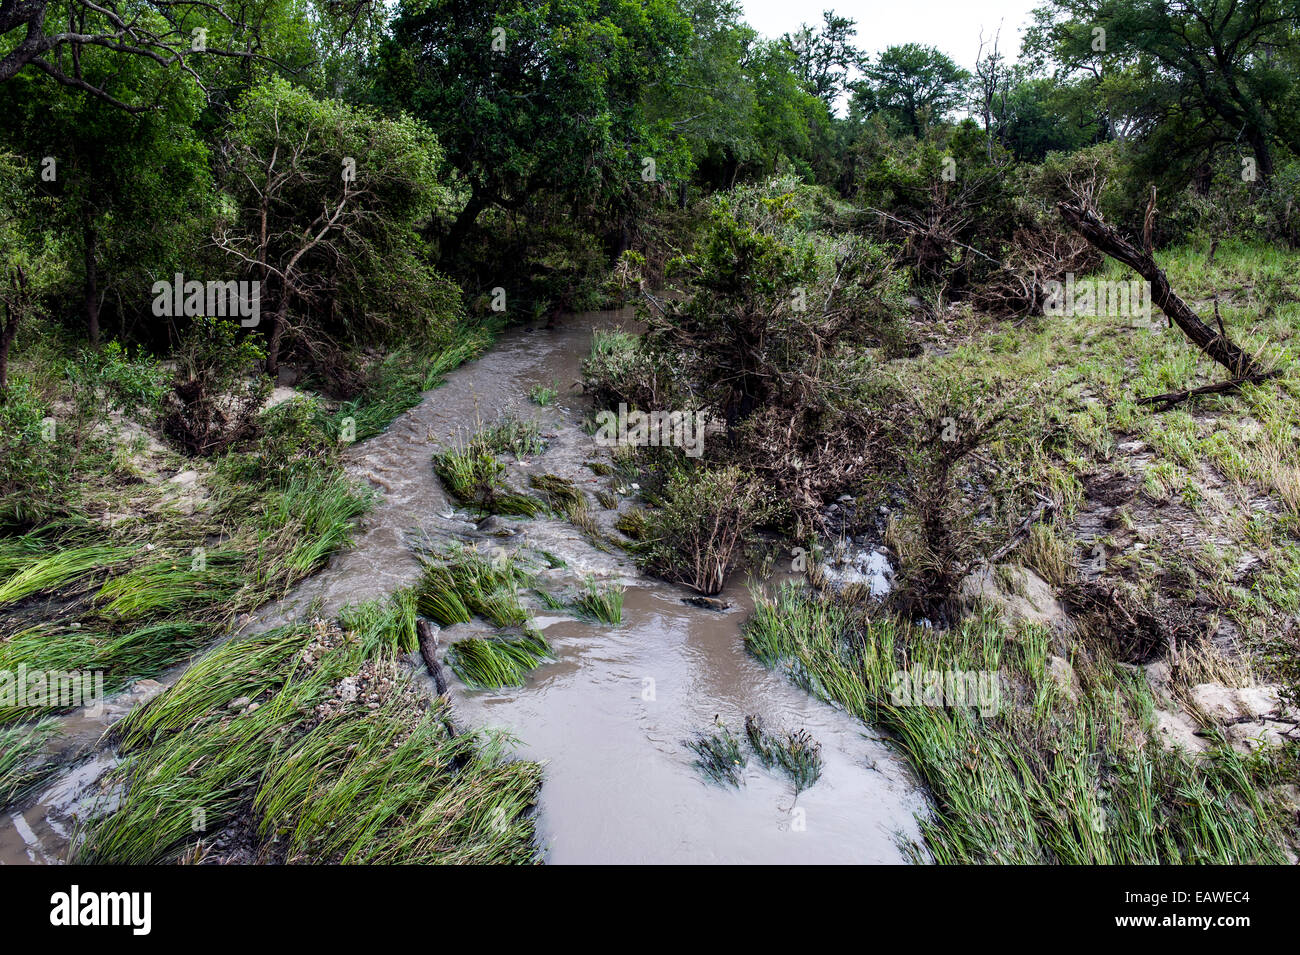 Raging floodwaters pushed reeds and grasses flat in a small river. Stock Photo